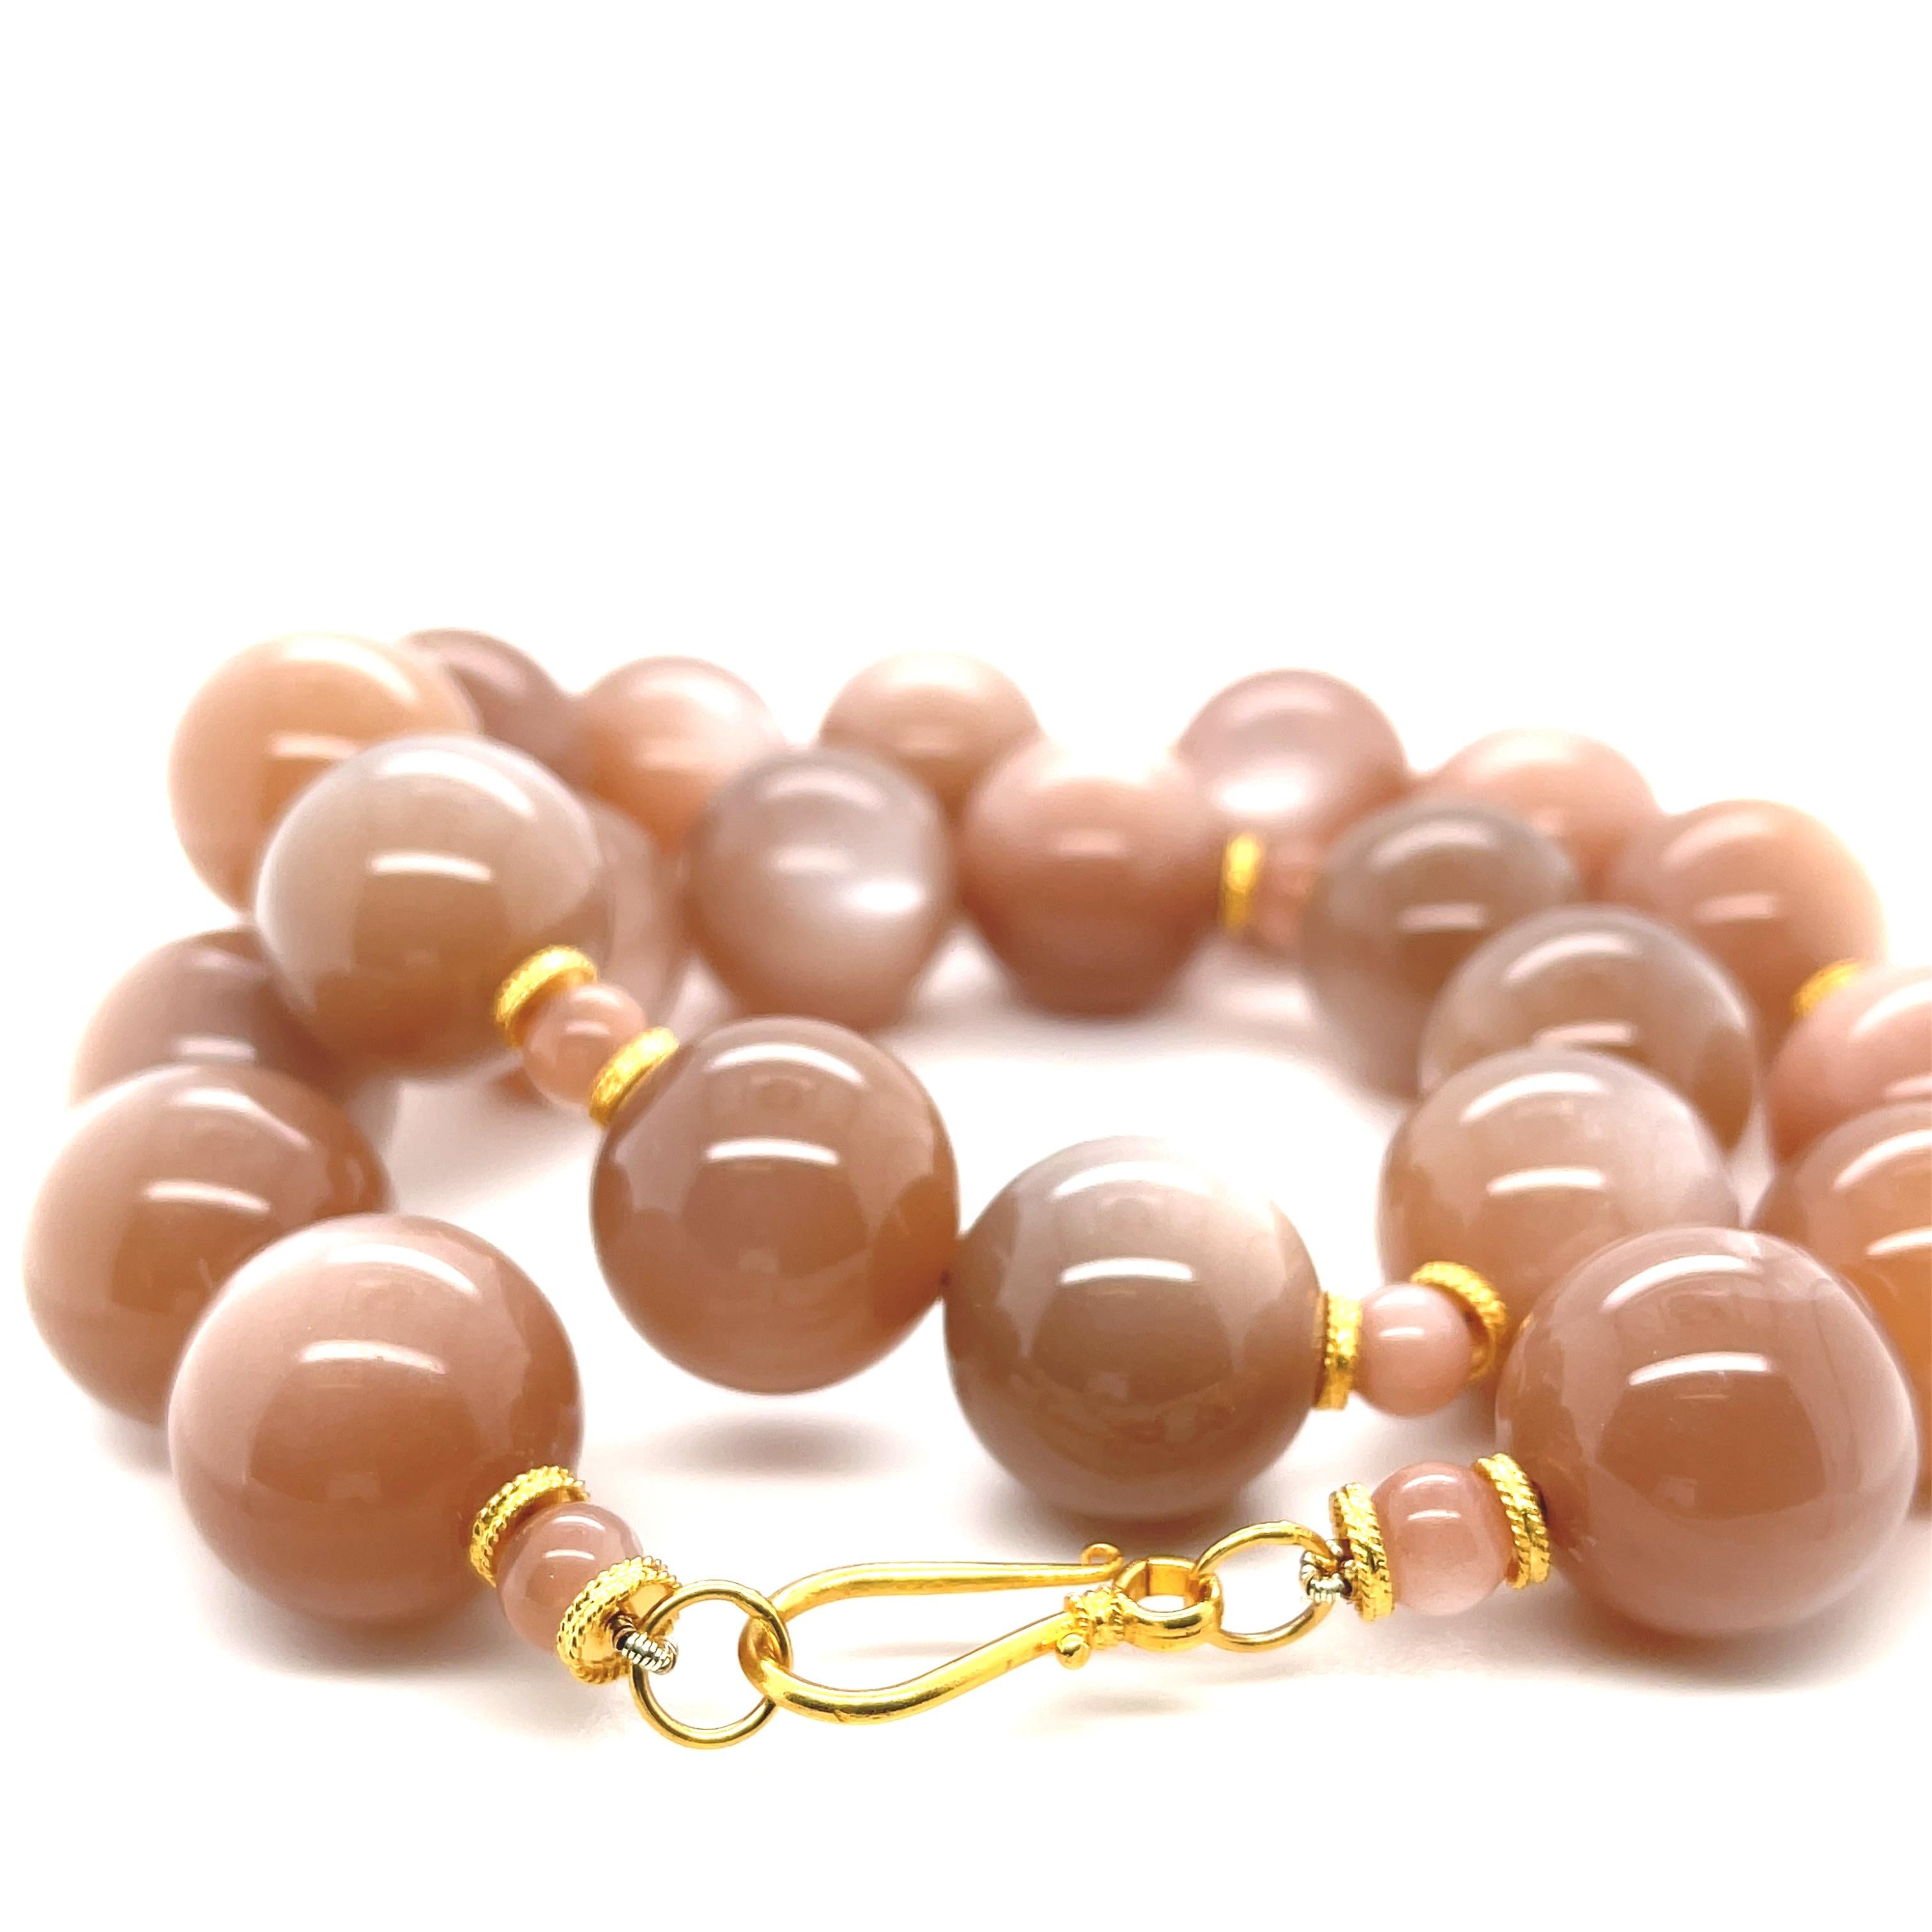 Artisan 18mm Peach Moonstone Beaded Necklace with 18k Yellow Gold Clasp